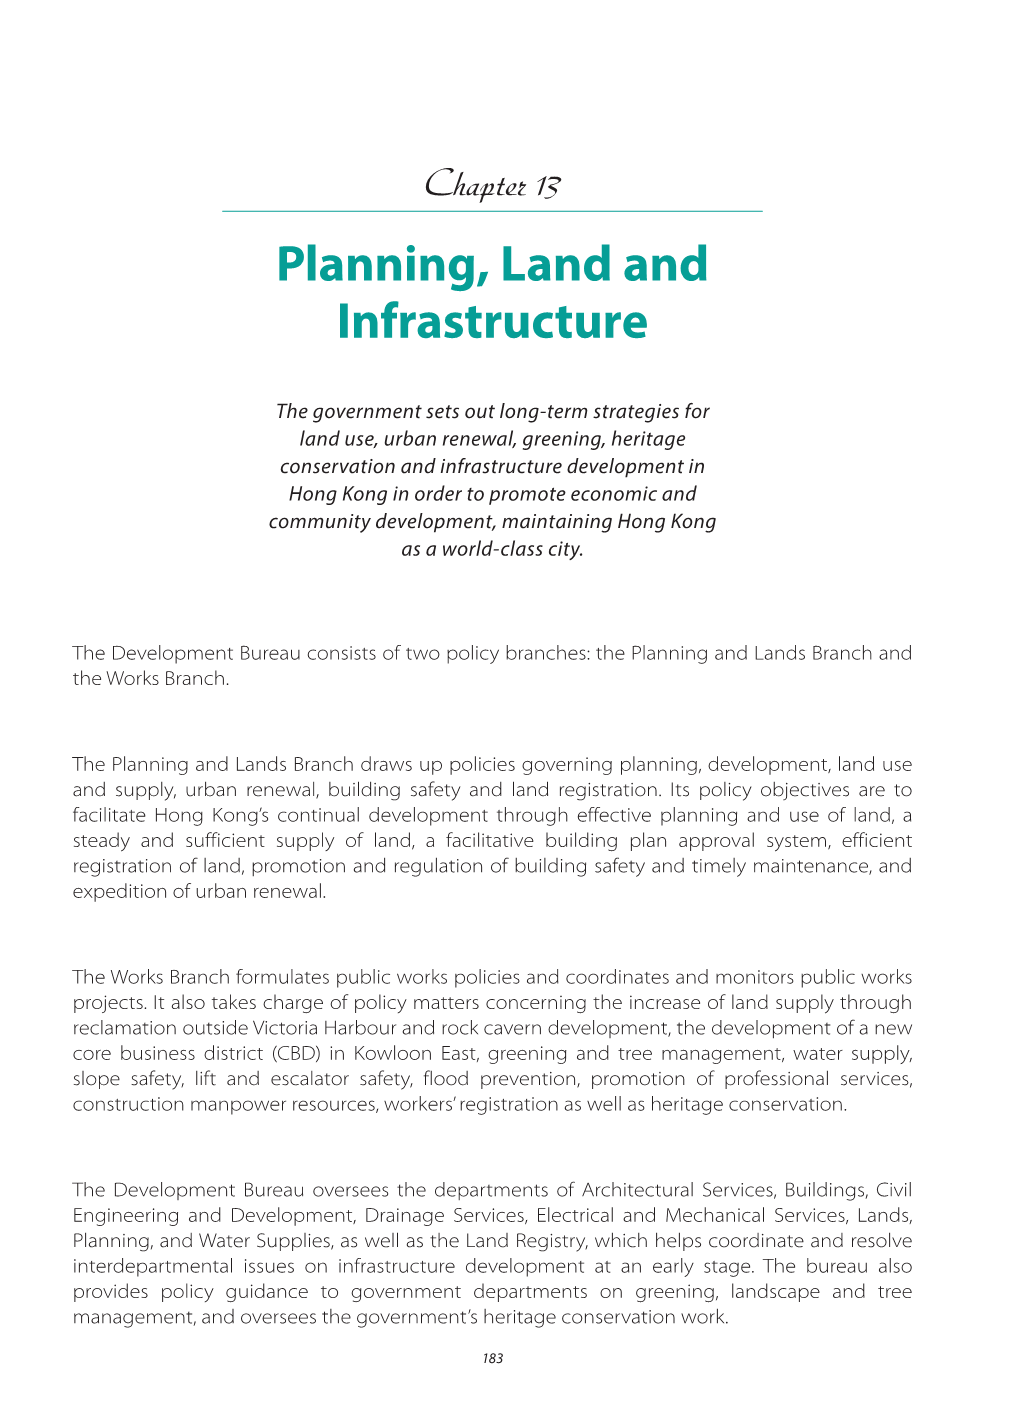 Planning, Land and Infrastructure